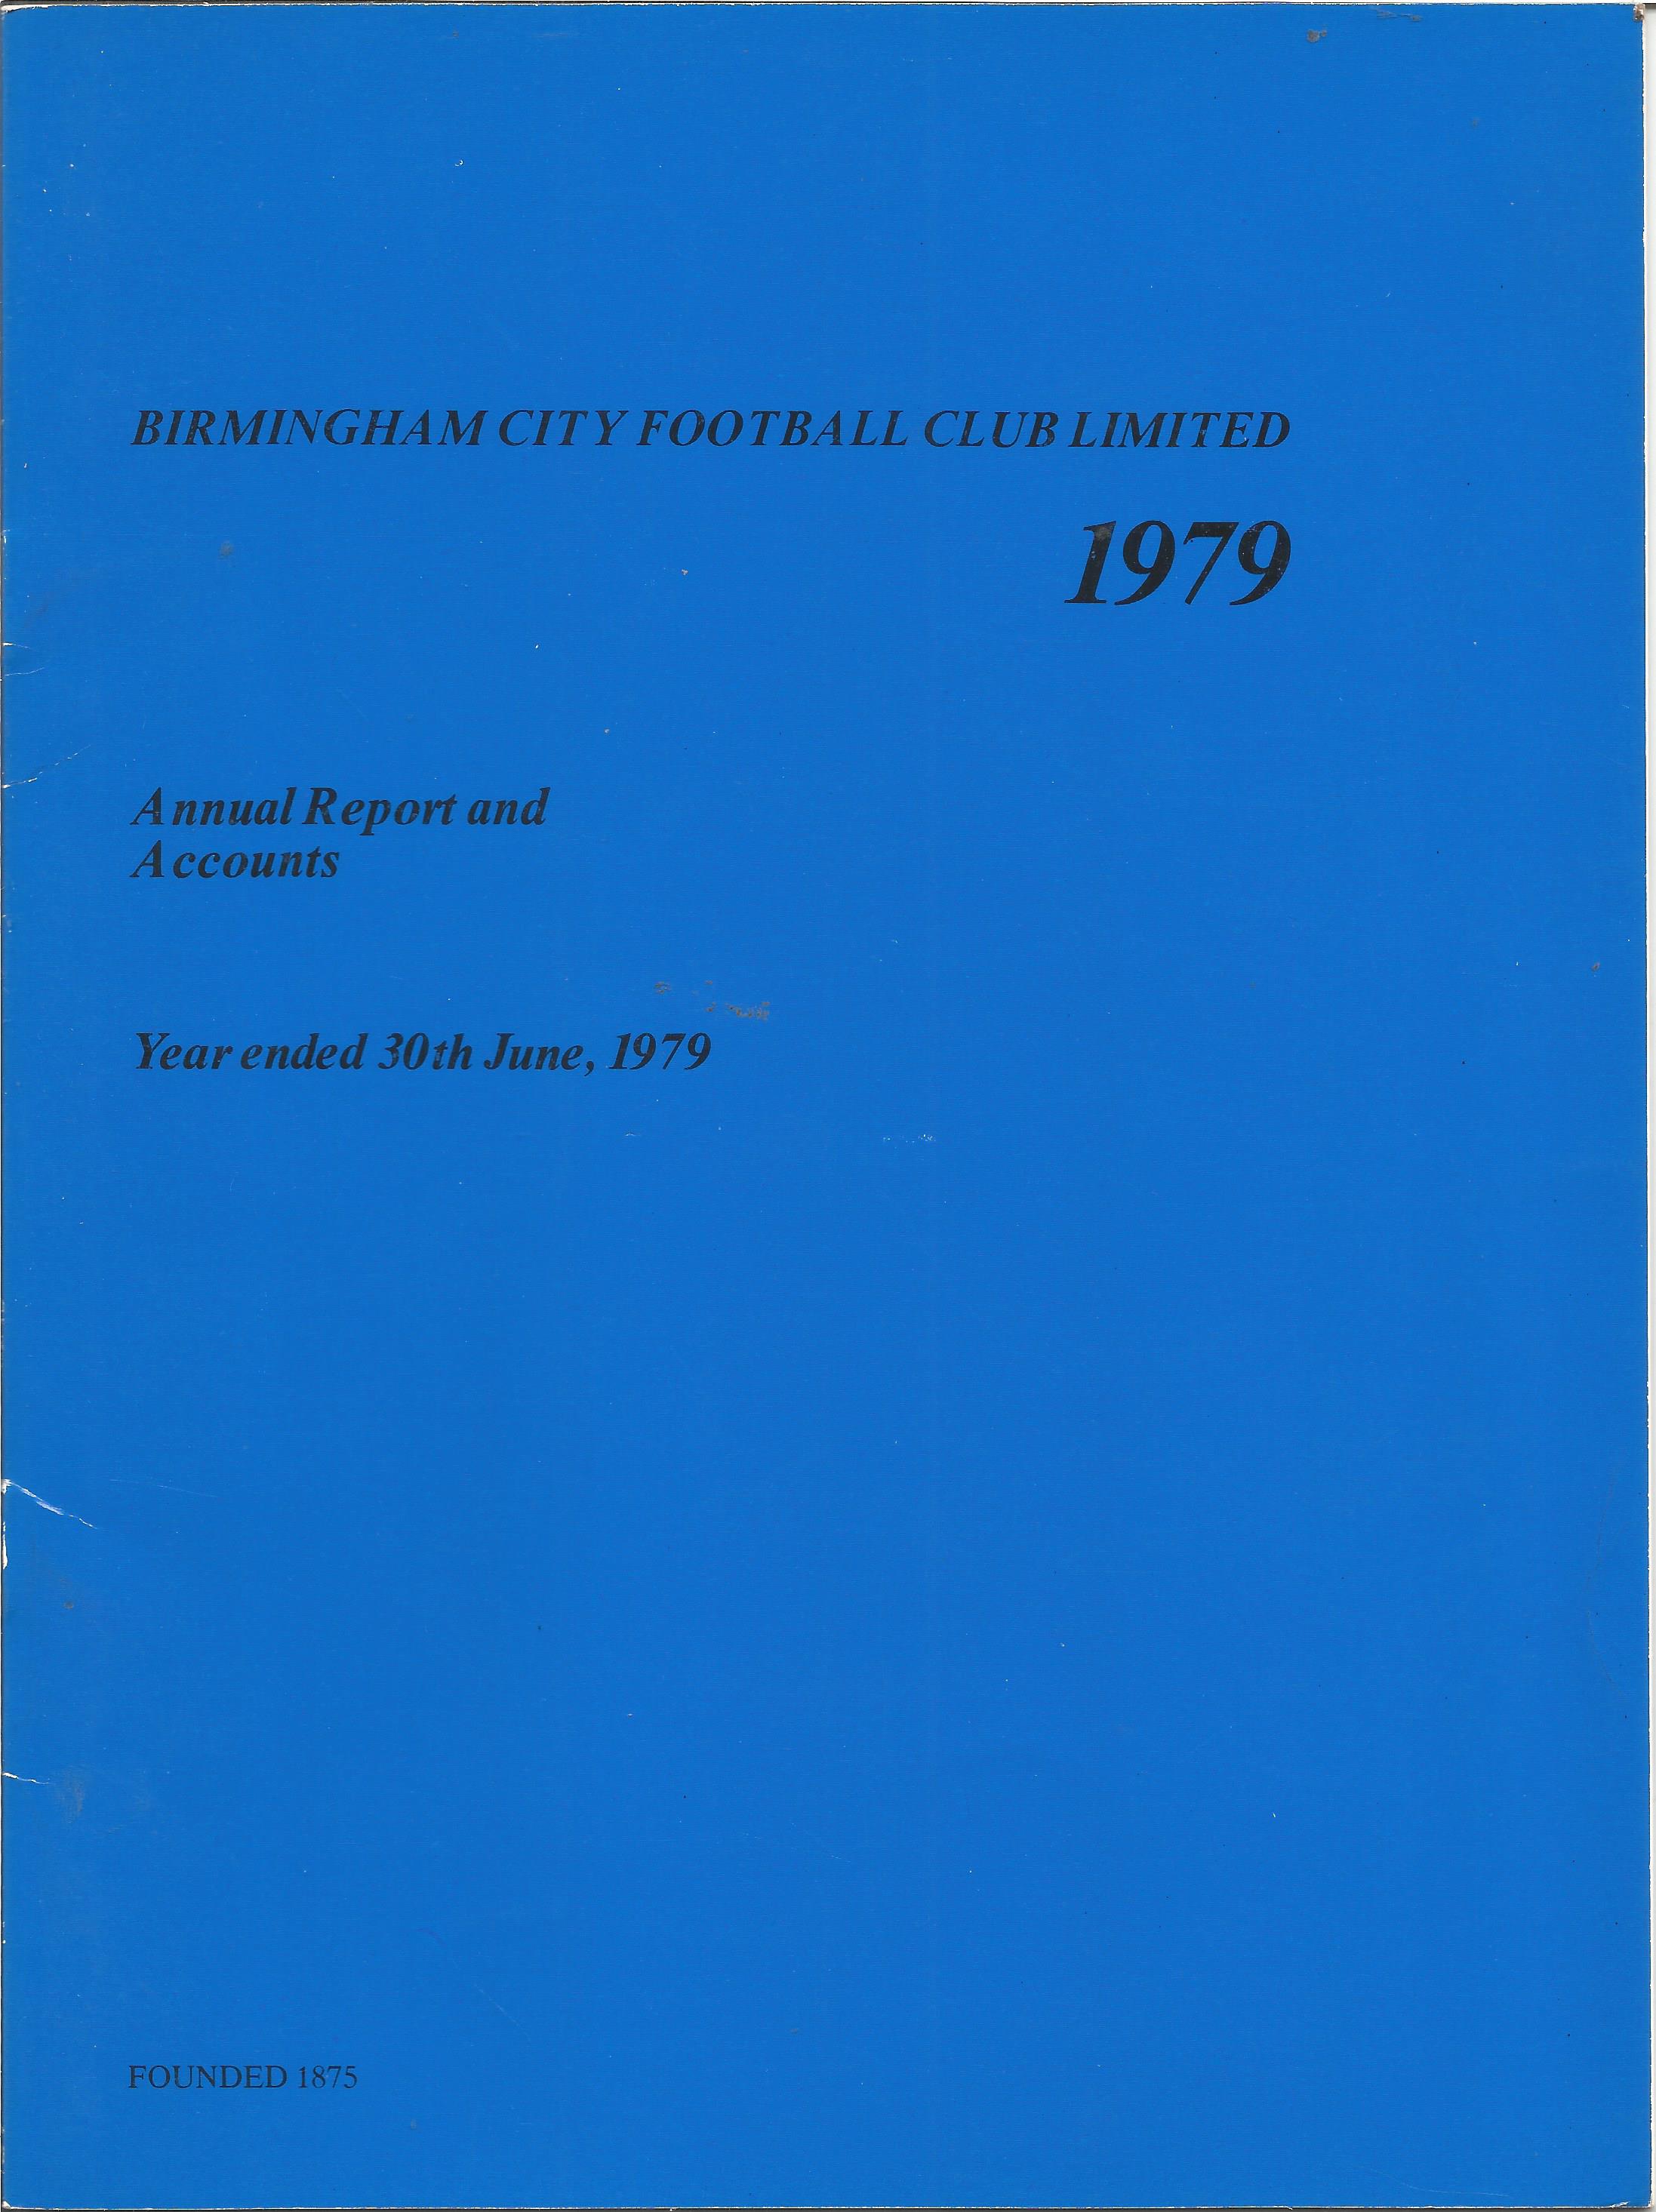 Birmingham City annual report and accounts booklet for the year ended 30th June 1979. Good